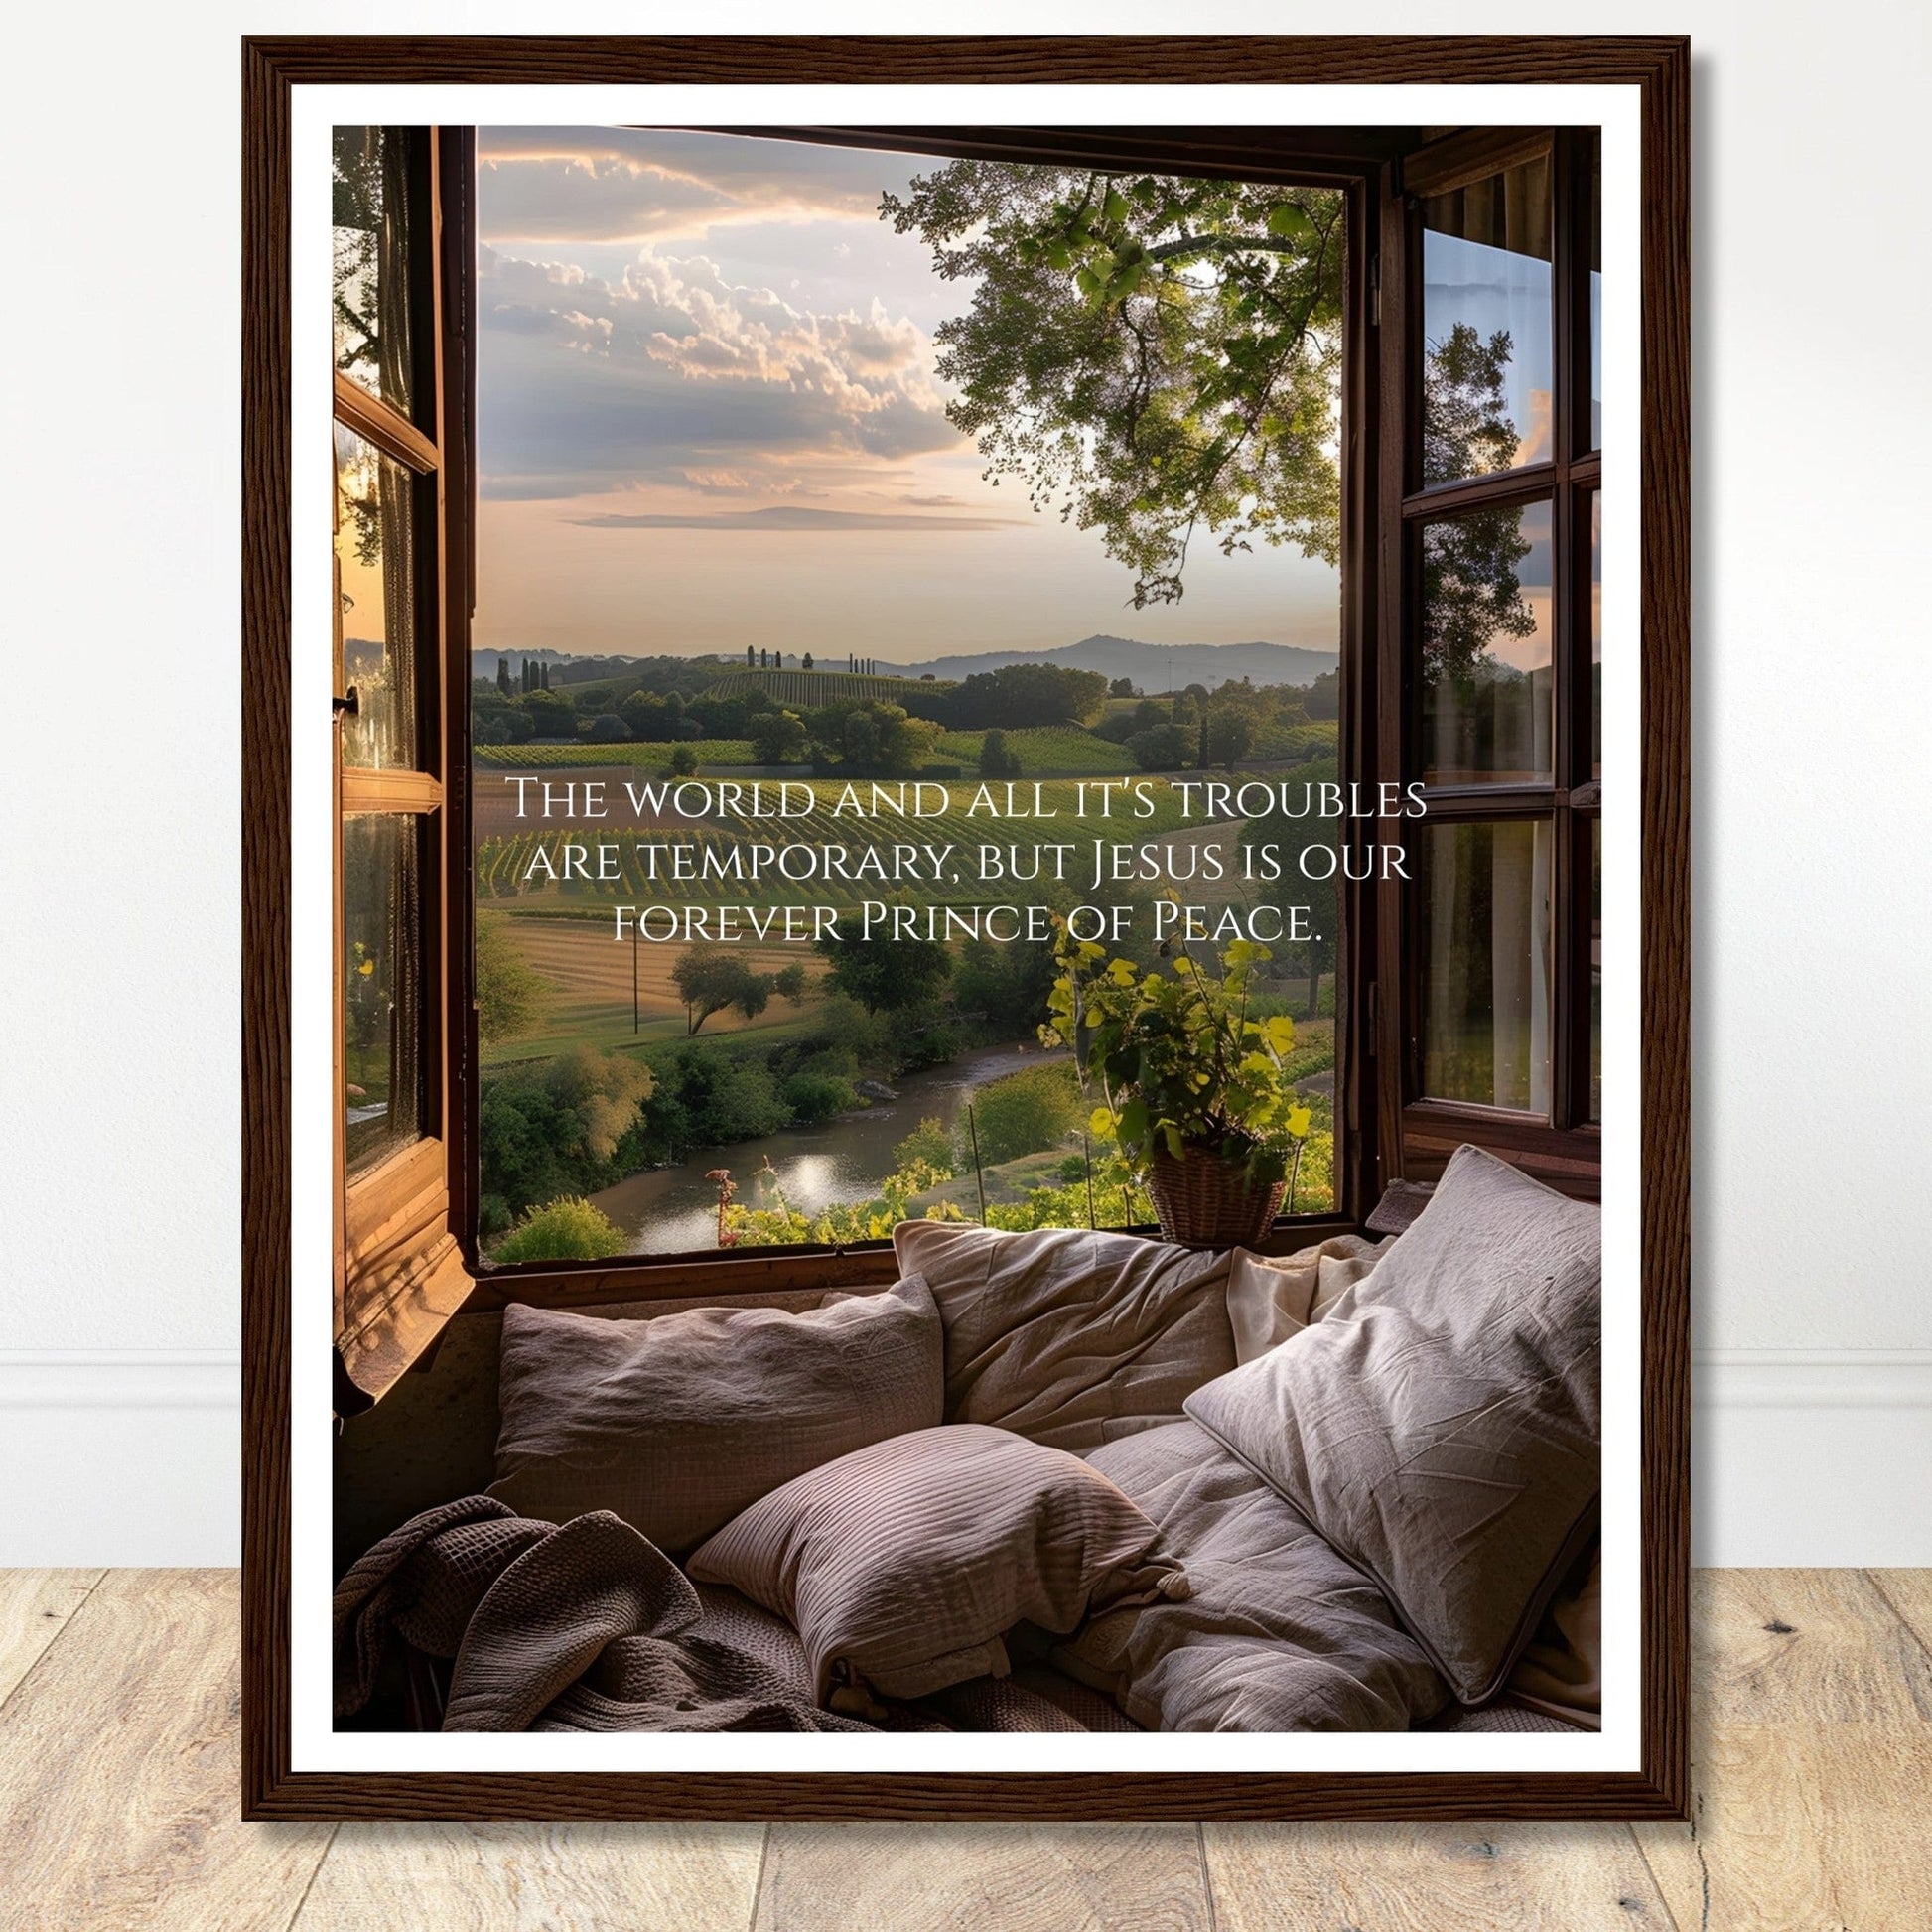 Coffee With My Father Print Material 40x50 cm / 16x20″ / Premium Matte Paper Wooden Framed Poster / Dark wood frame Jesus, Our Forever Prince of Peace